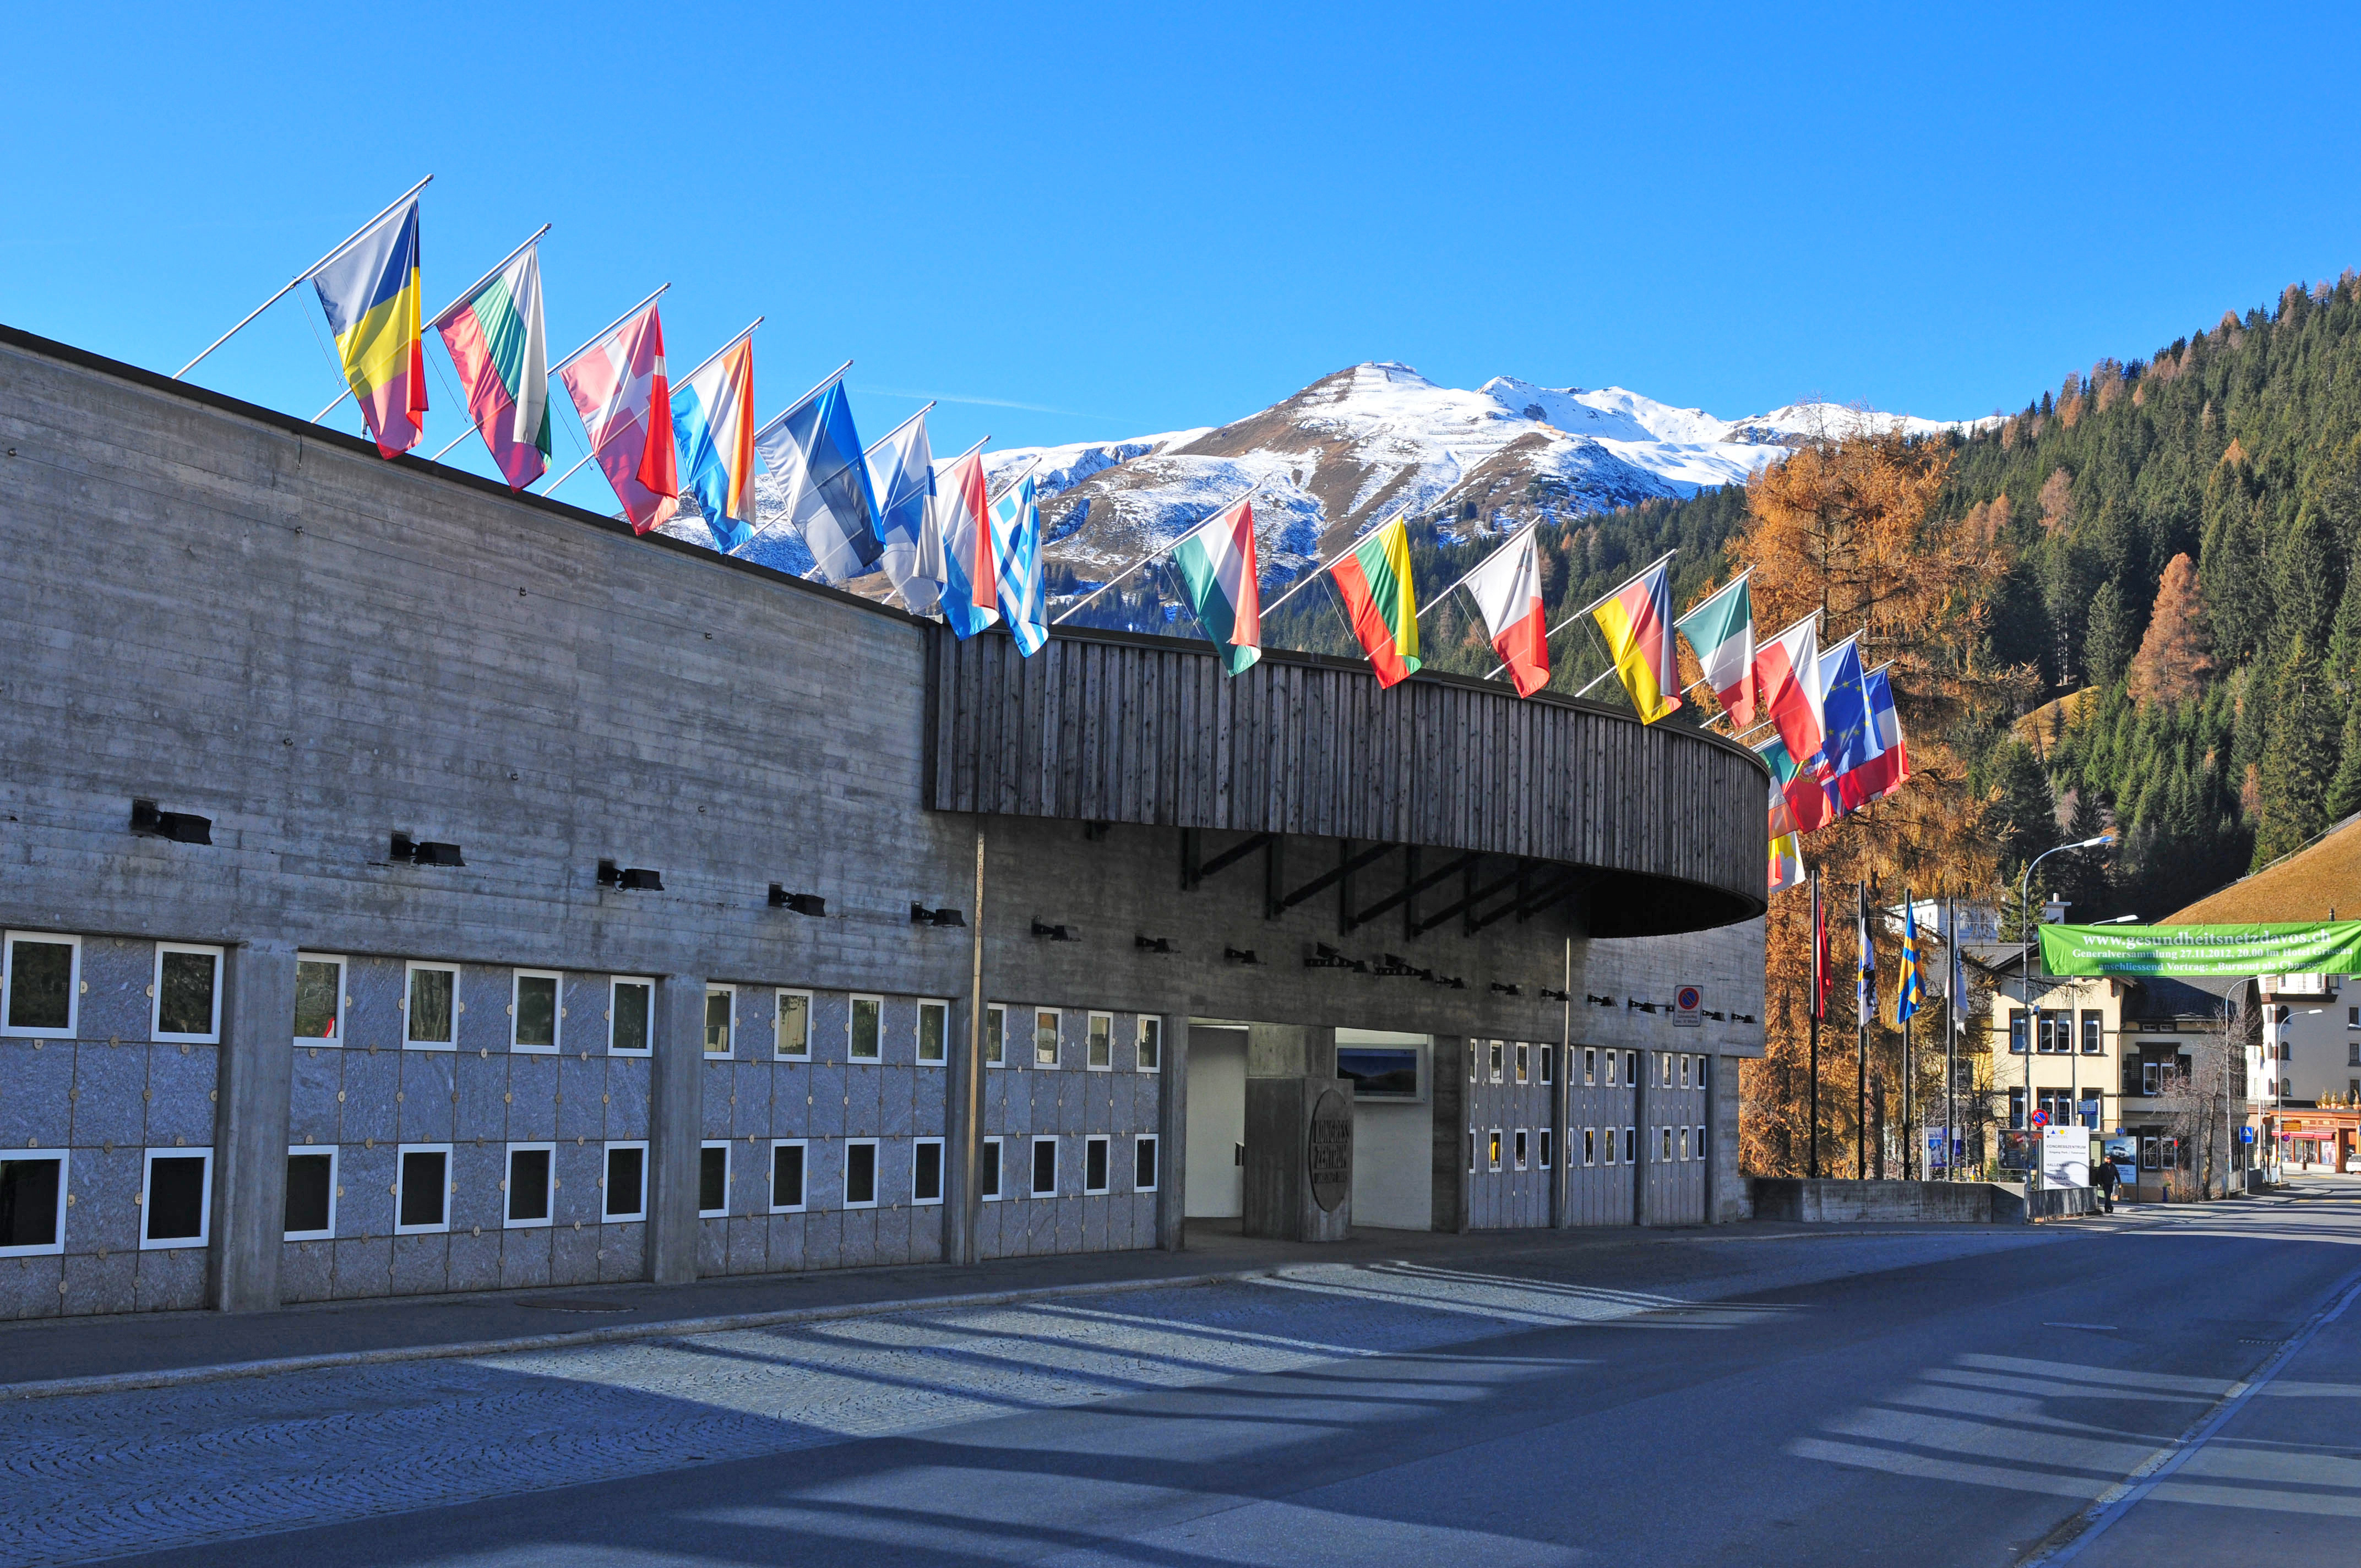 Congress Centre at Davos, Switzerland with flags